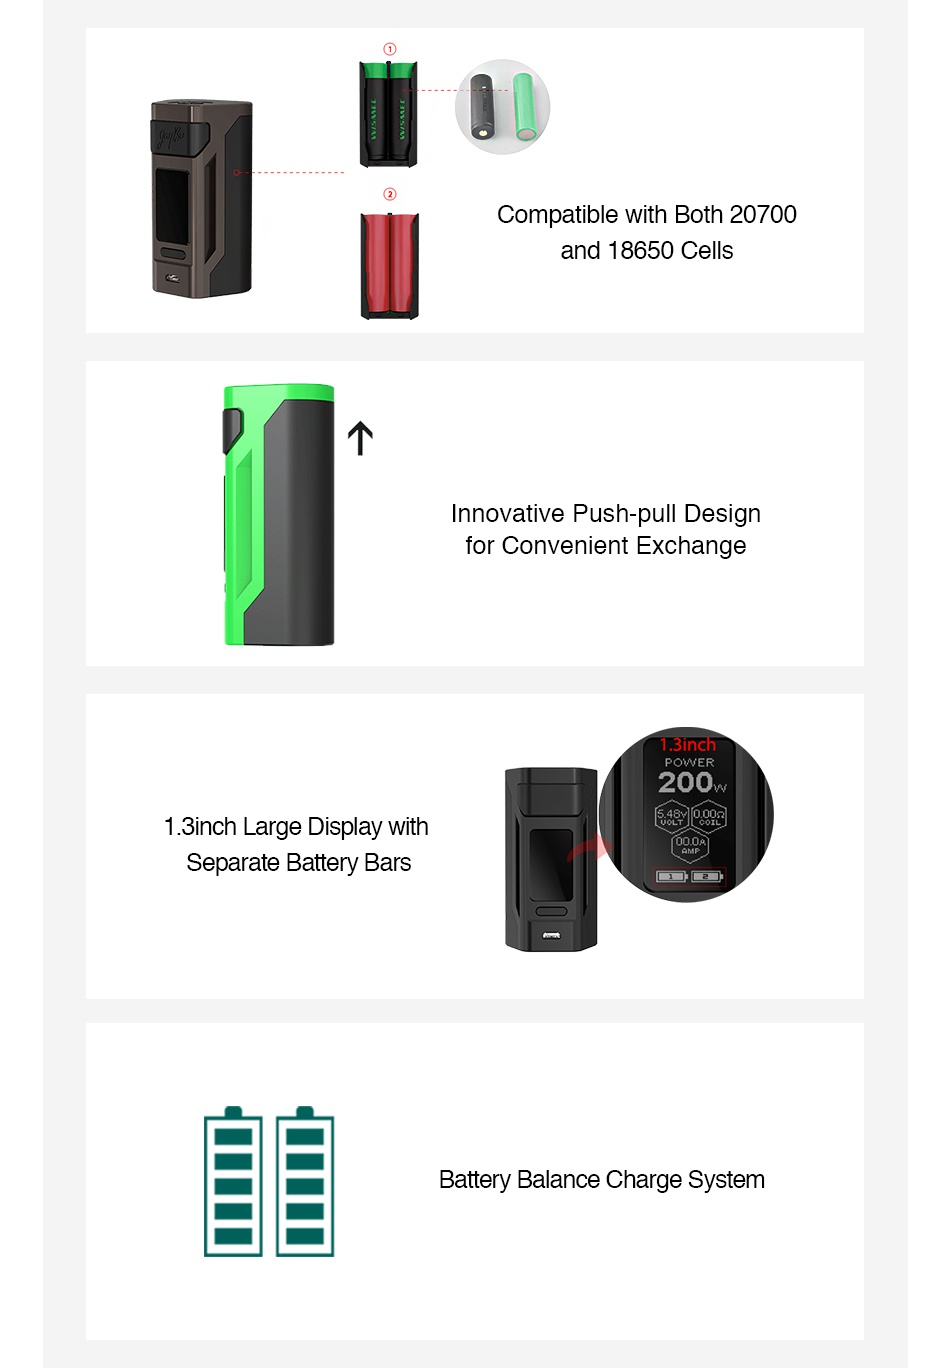 WISMEC Reuleaux RX2 20700 200W TC MOD Compatible with Both 20700 and 1 8650 Ce novative Push pull Design for Convenient exchange 200 1 3inch Large Display with Separate Battery Bars Battery Balance Charge System